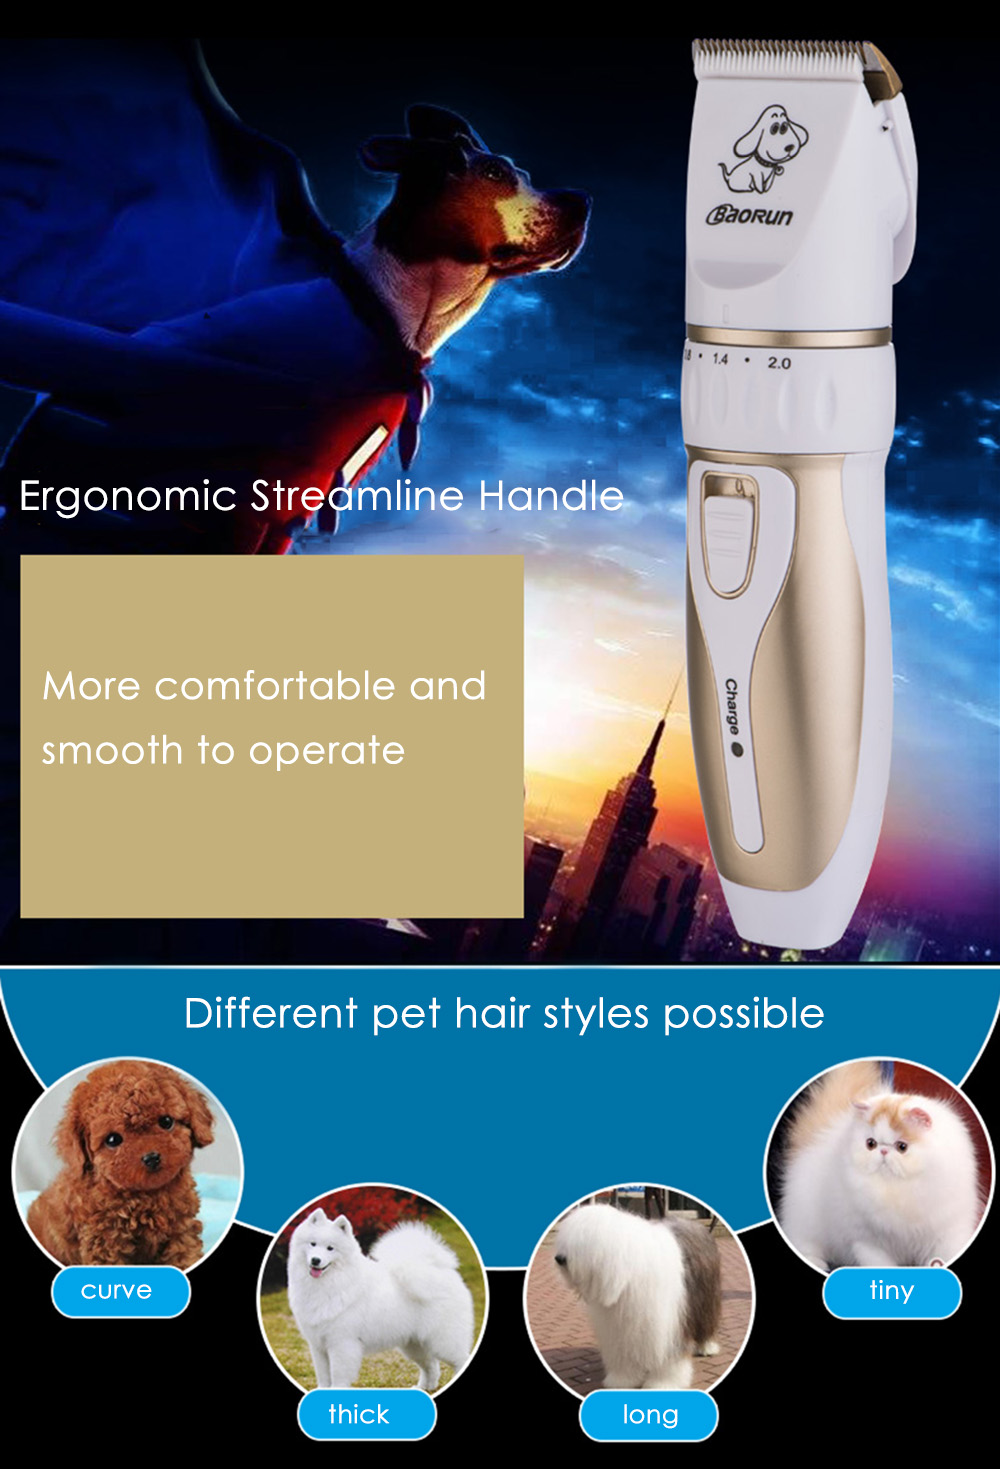 BaoRun P3 Professional Rechargeable Pet Electric Hair Clipper Cutter with Grooming Kit